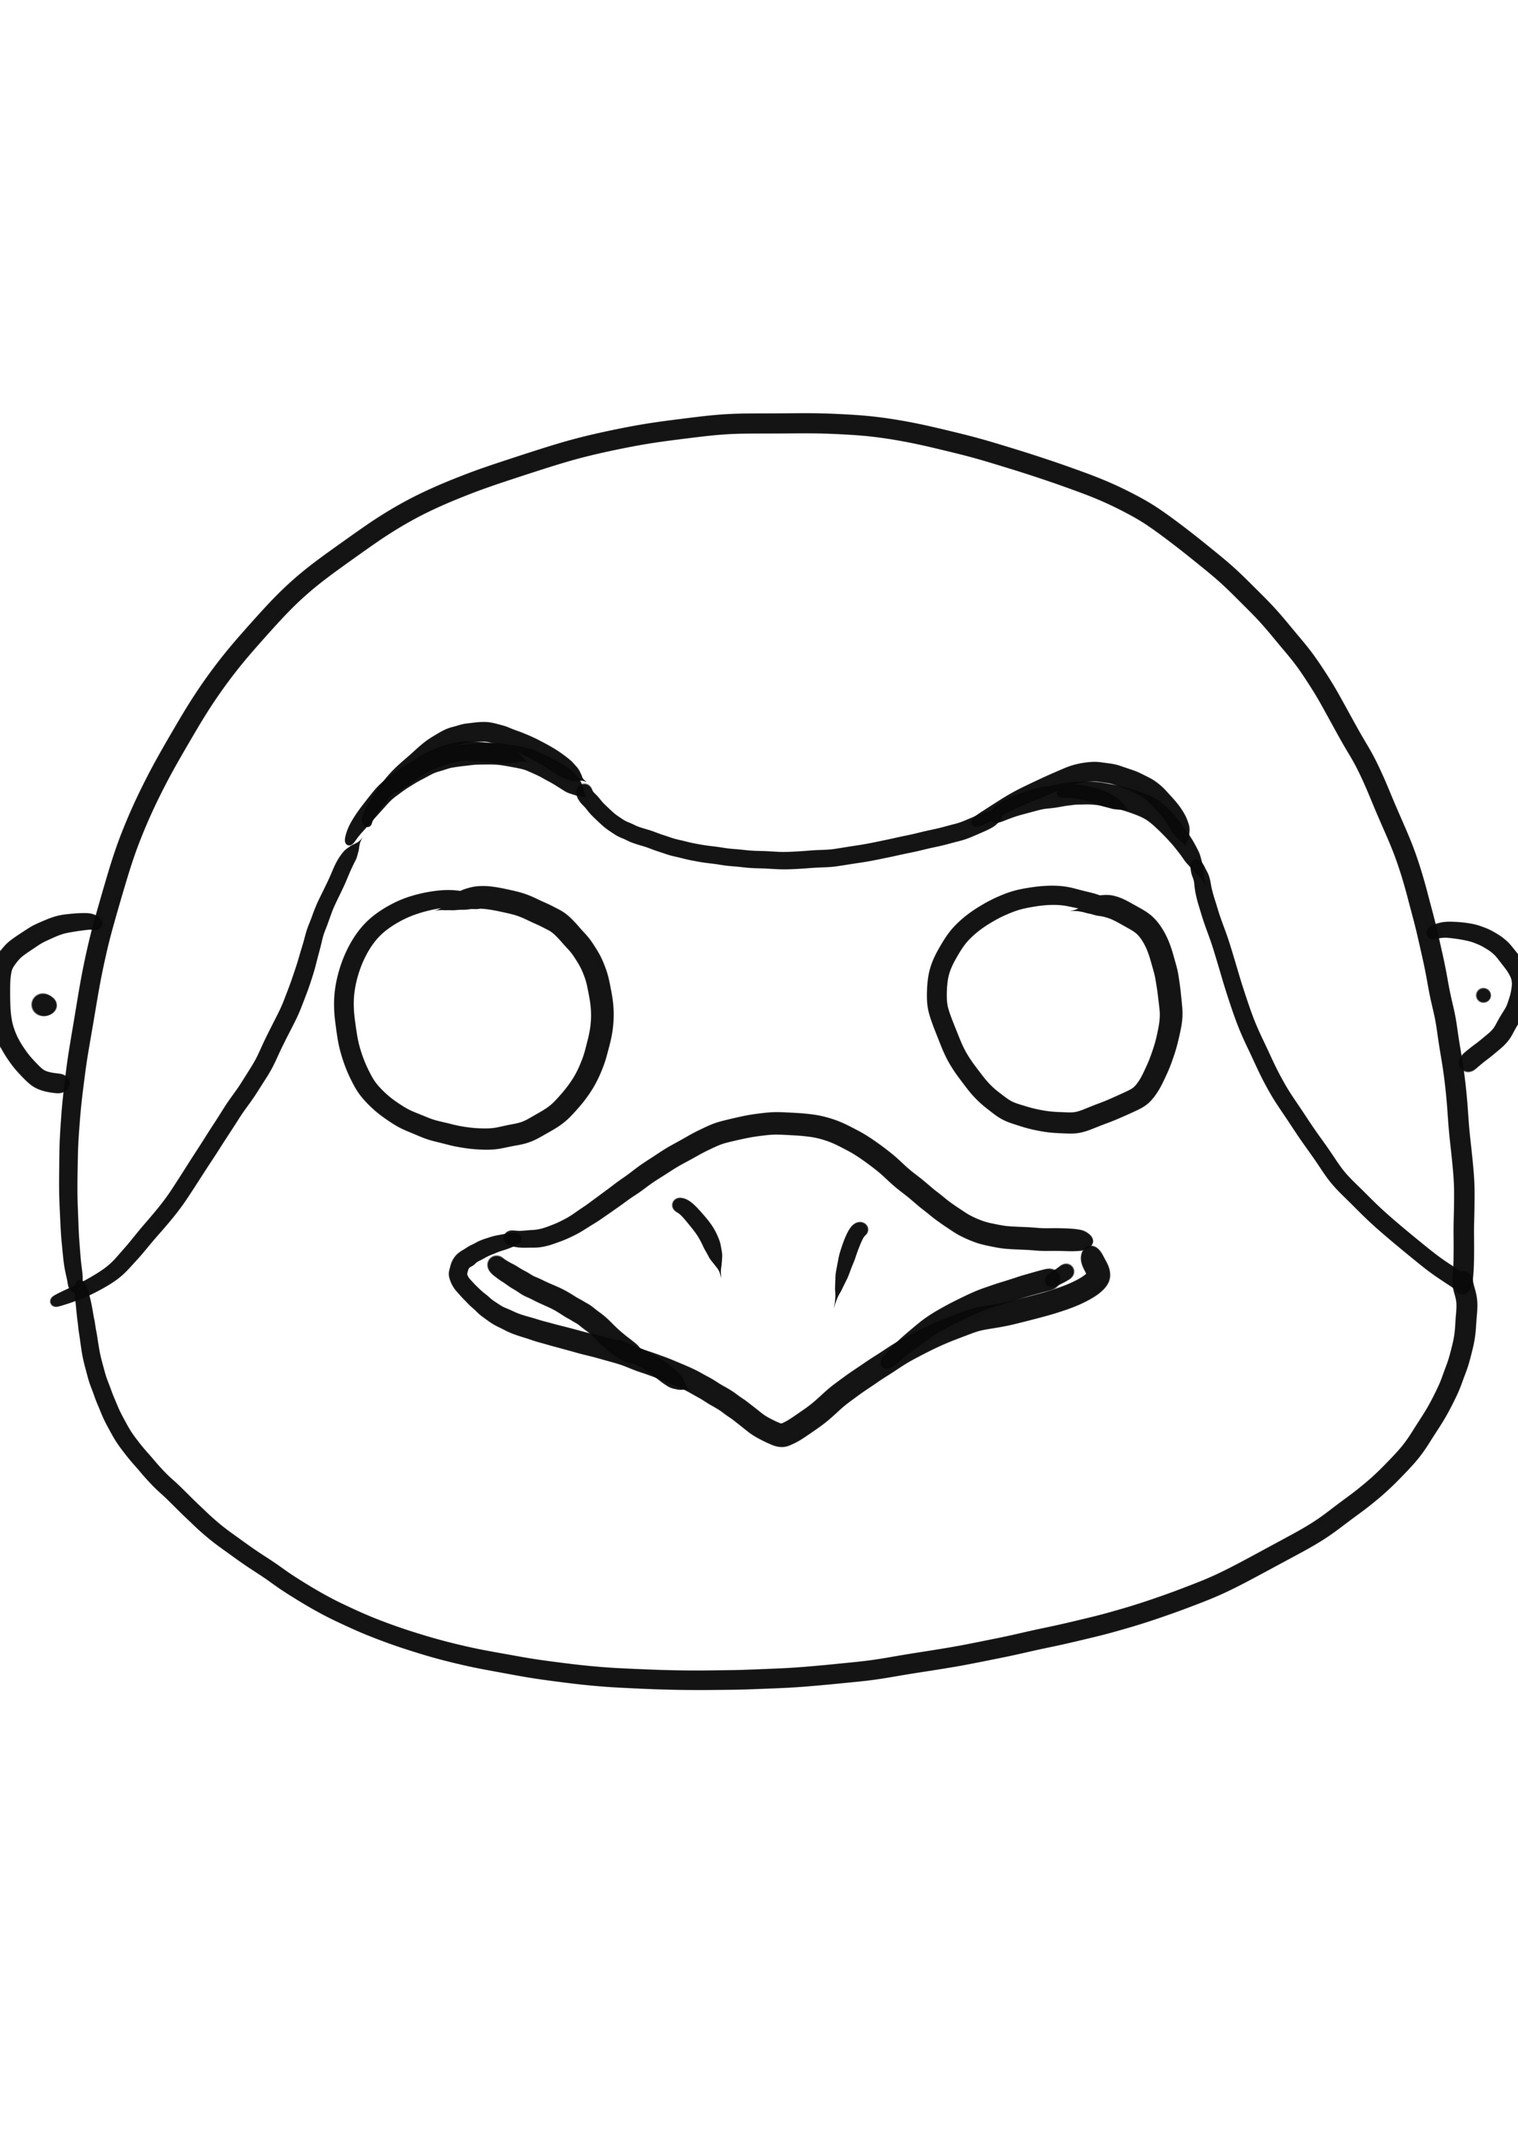 Robin mask coloring page to cut out